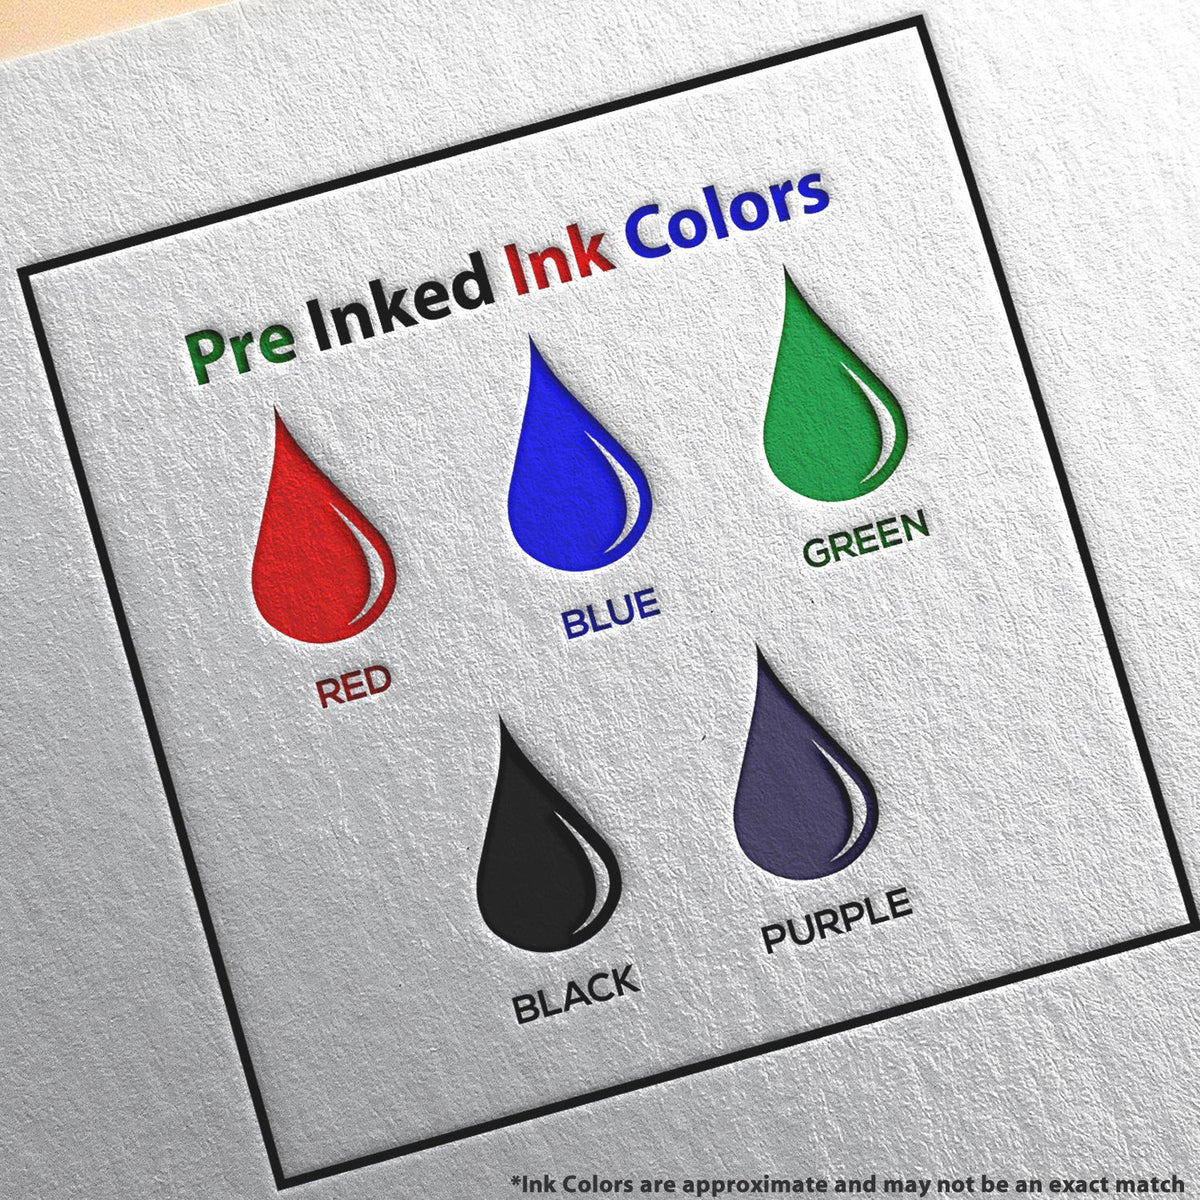 A picture showing the different ink colors or hues available for the MaxLight Premium Pre-Inked Rhode Island Rectangular Notarial Stamp product.